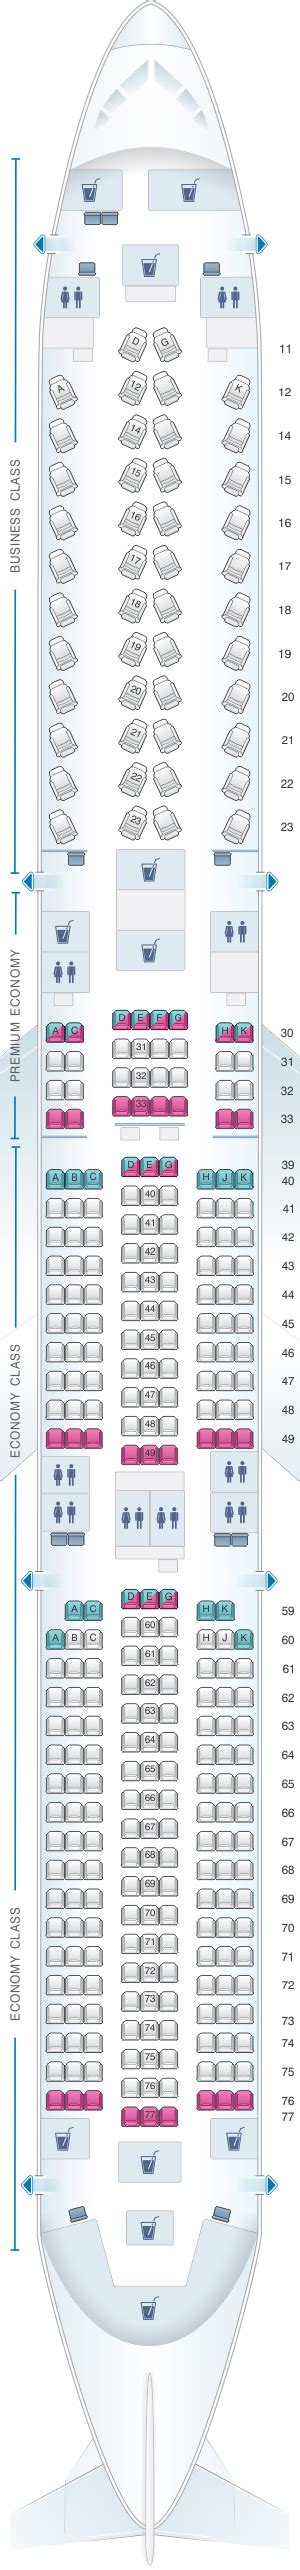 Seat Map Cathay Pacific Airways Airbus A350 1000 Seatmaestro Hot Sex